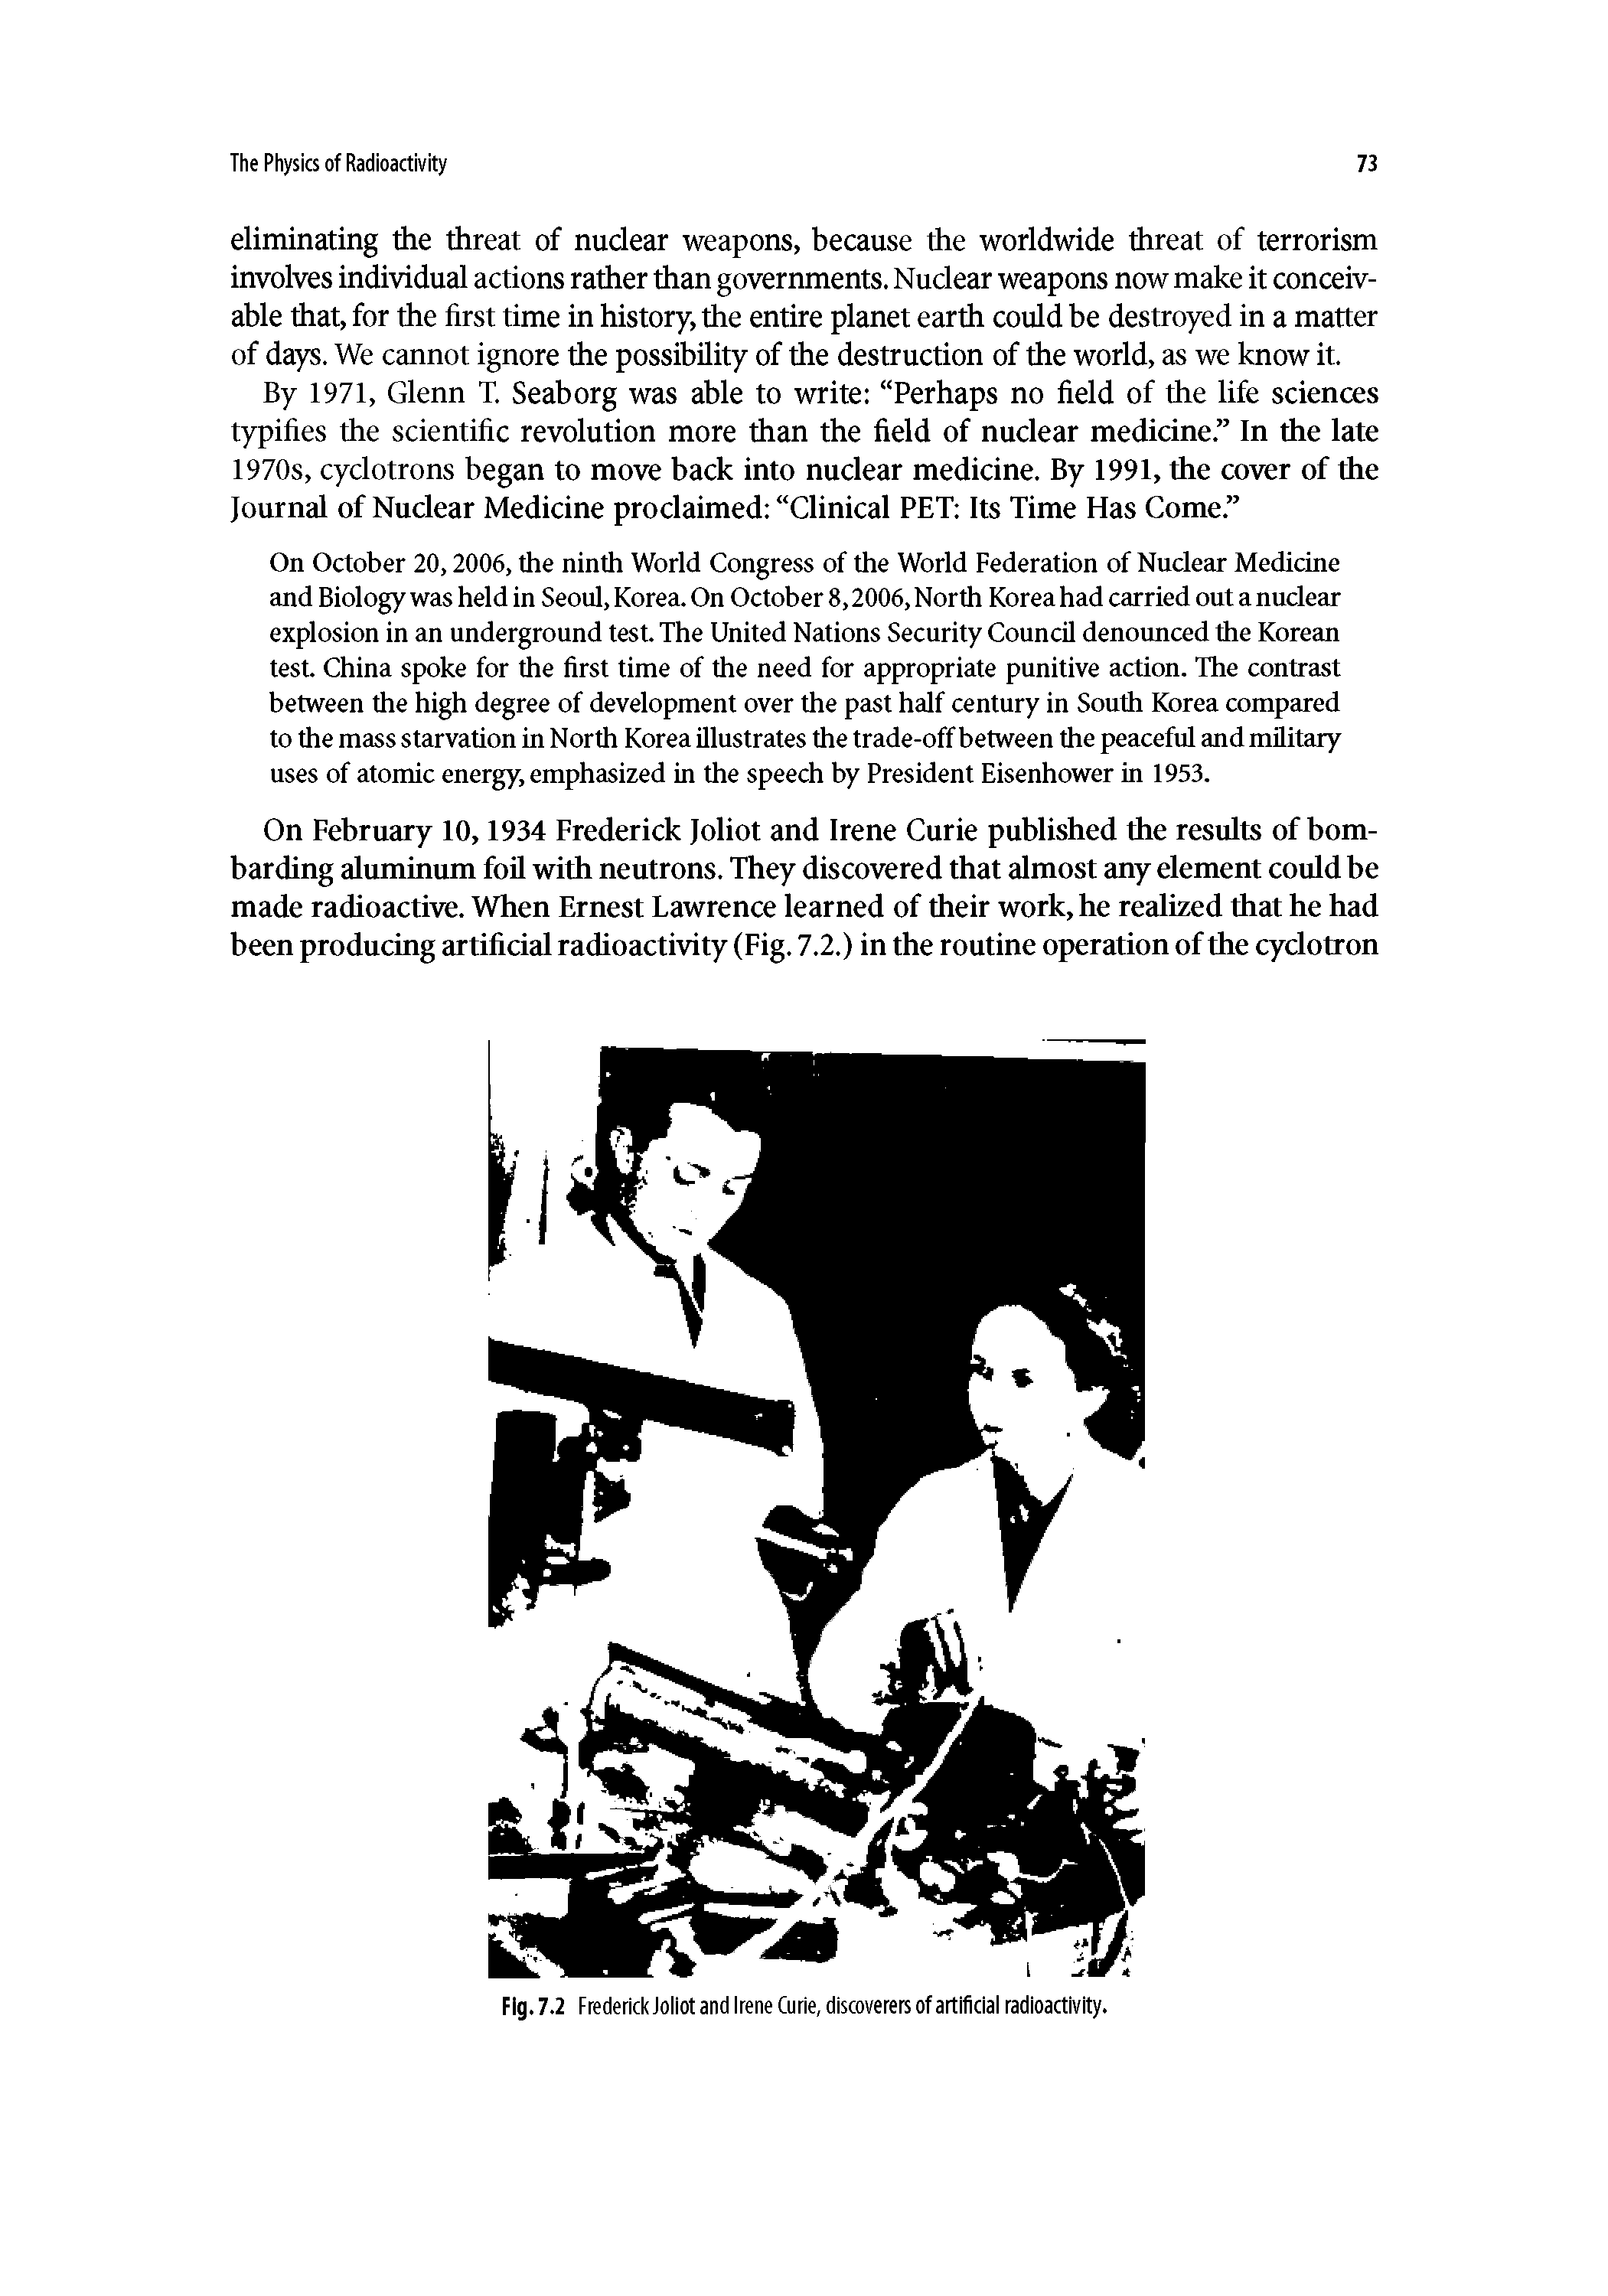 Fig. 7.2 Frederick Joliot and Irene Curie, discoverers of artificial radioactivity.